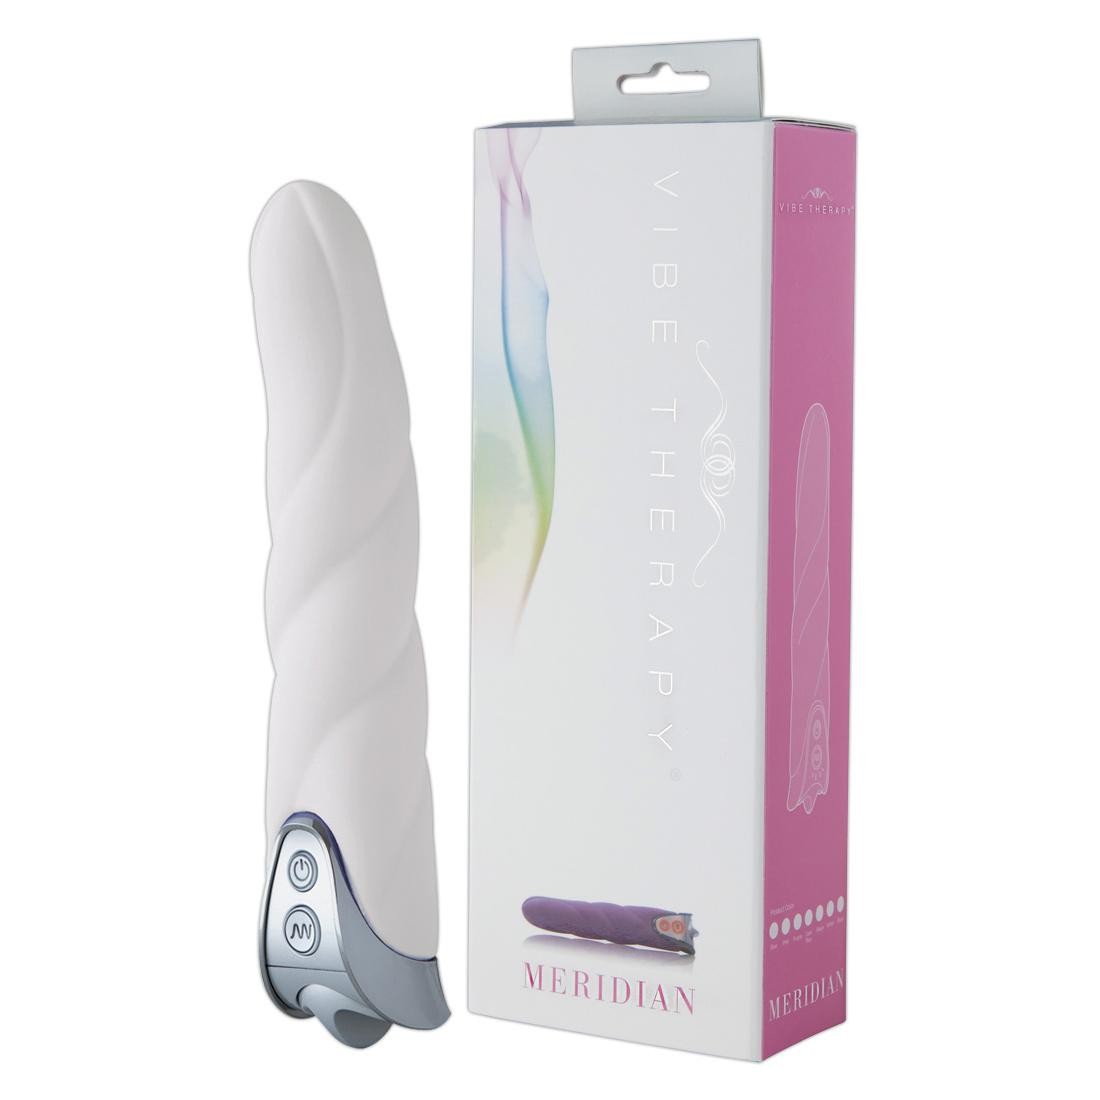  Vibe  Therapy  -  Vibe  Therapy  Meridian  White  -  Vibrator 